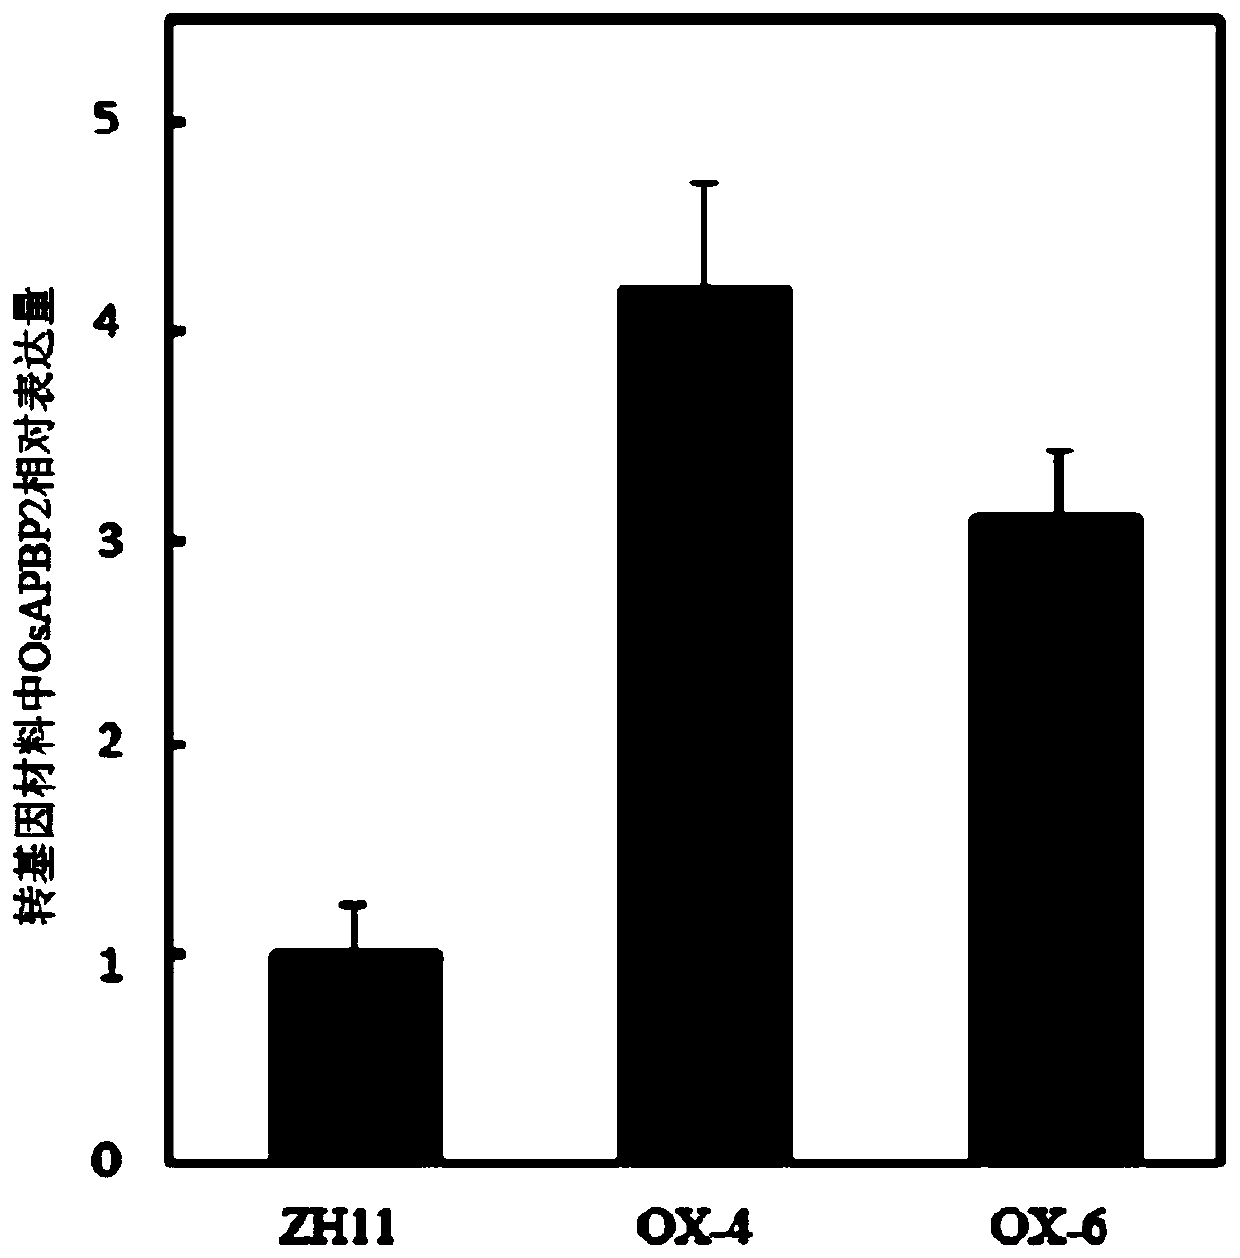 The Application of OSAPBP2 Protein in Promoting Folate Synthesis in Plants